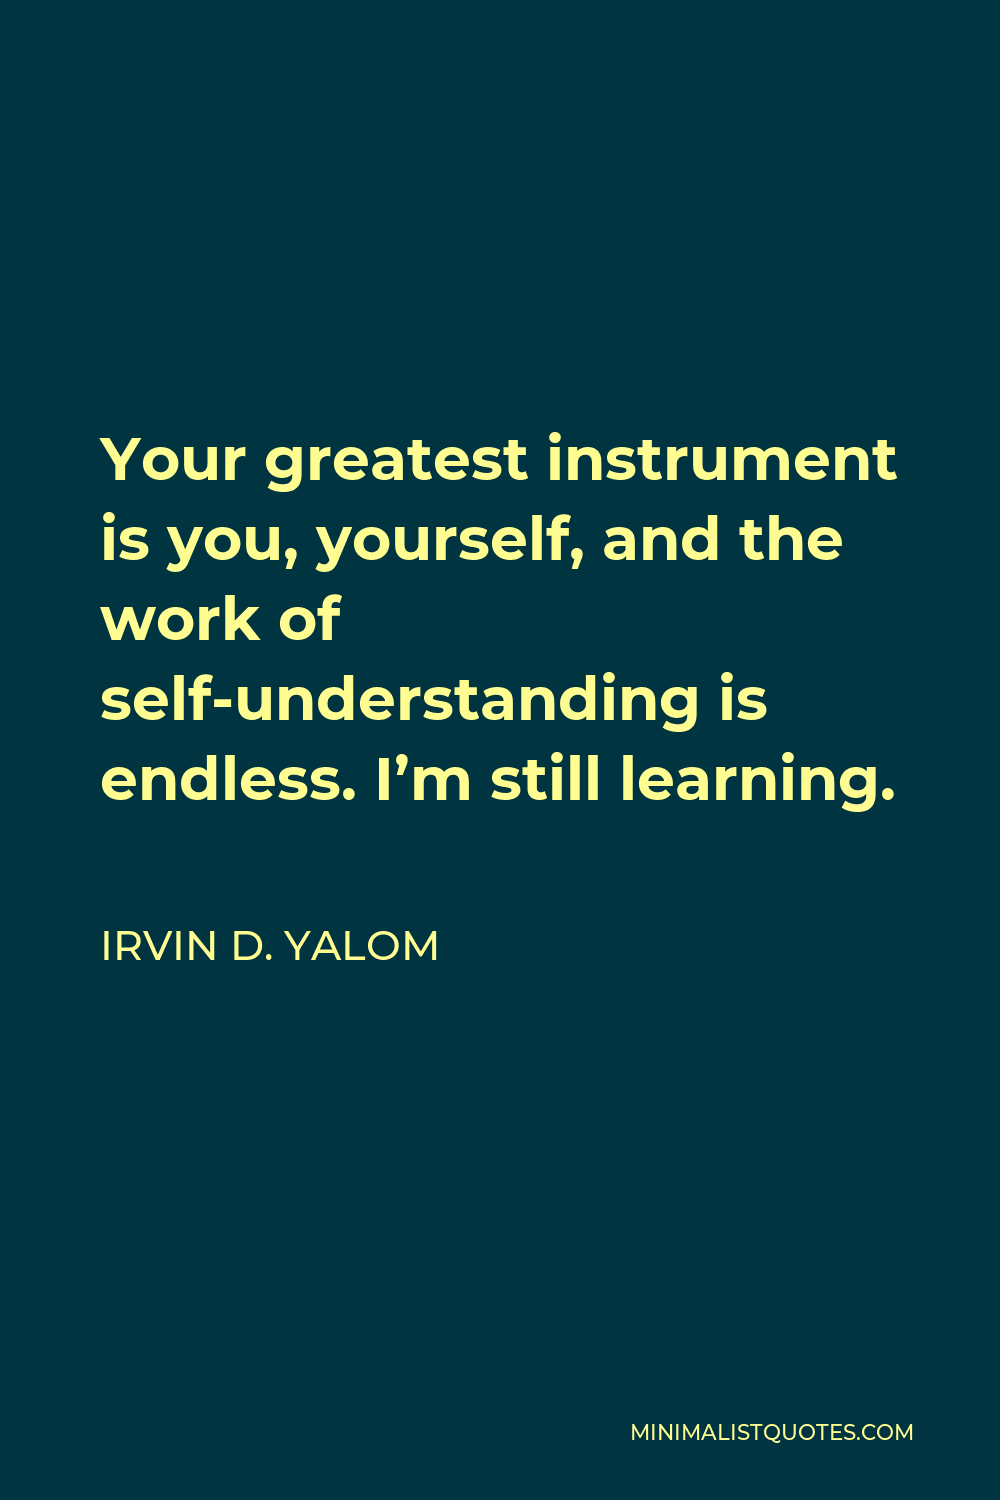 Irvin D. Yalom Quote - Your greatest instrument is you, yourself, and the work of self-understanding is endless. I’m still learning.